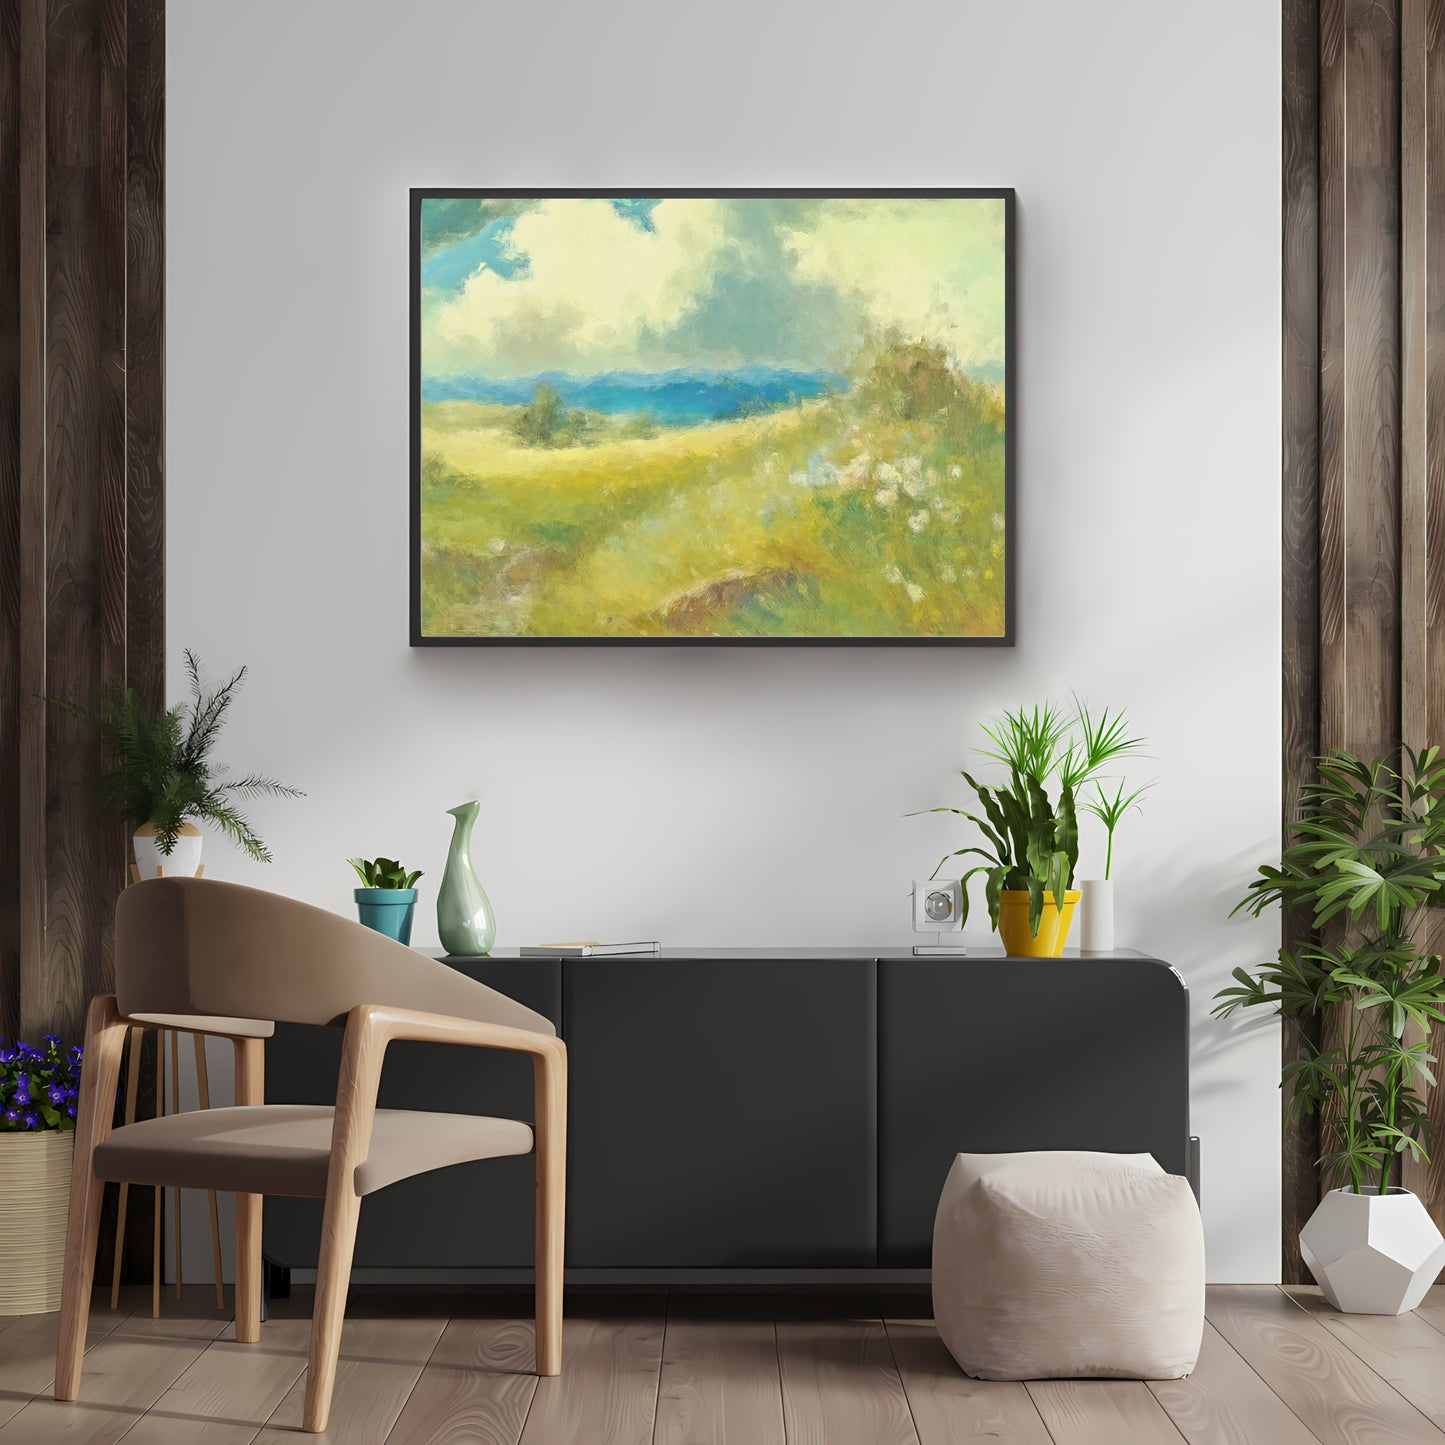 Green Wildflower Meadow Paper Poster Prints Wall Art Abstract Oil Painting with Majestic Mountains and Vivid Colors Nature-Inspired Home Decor